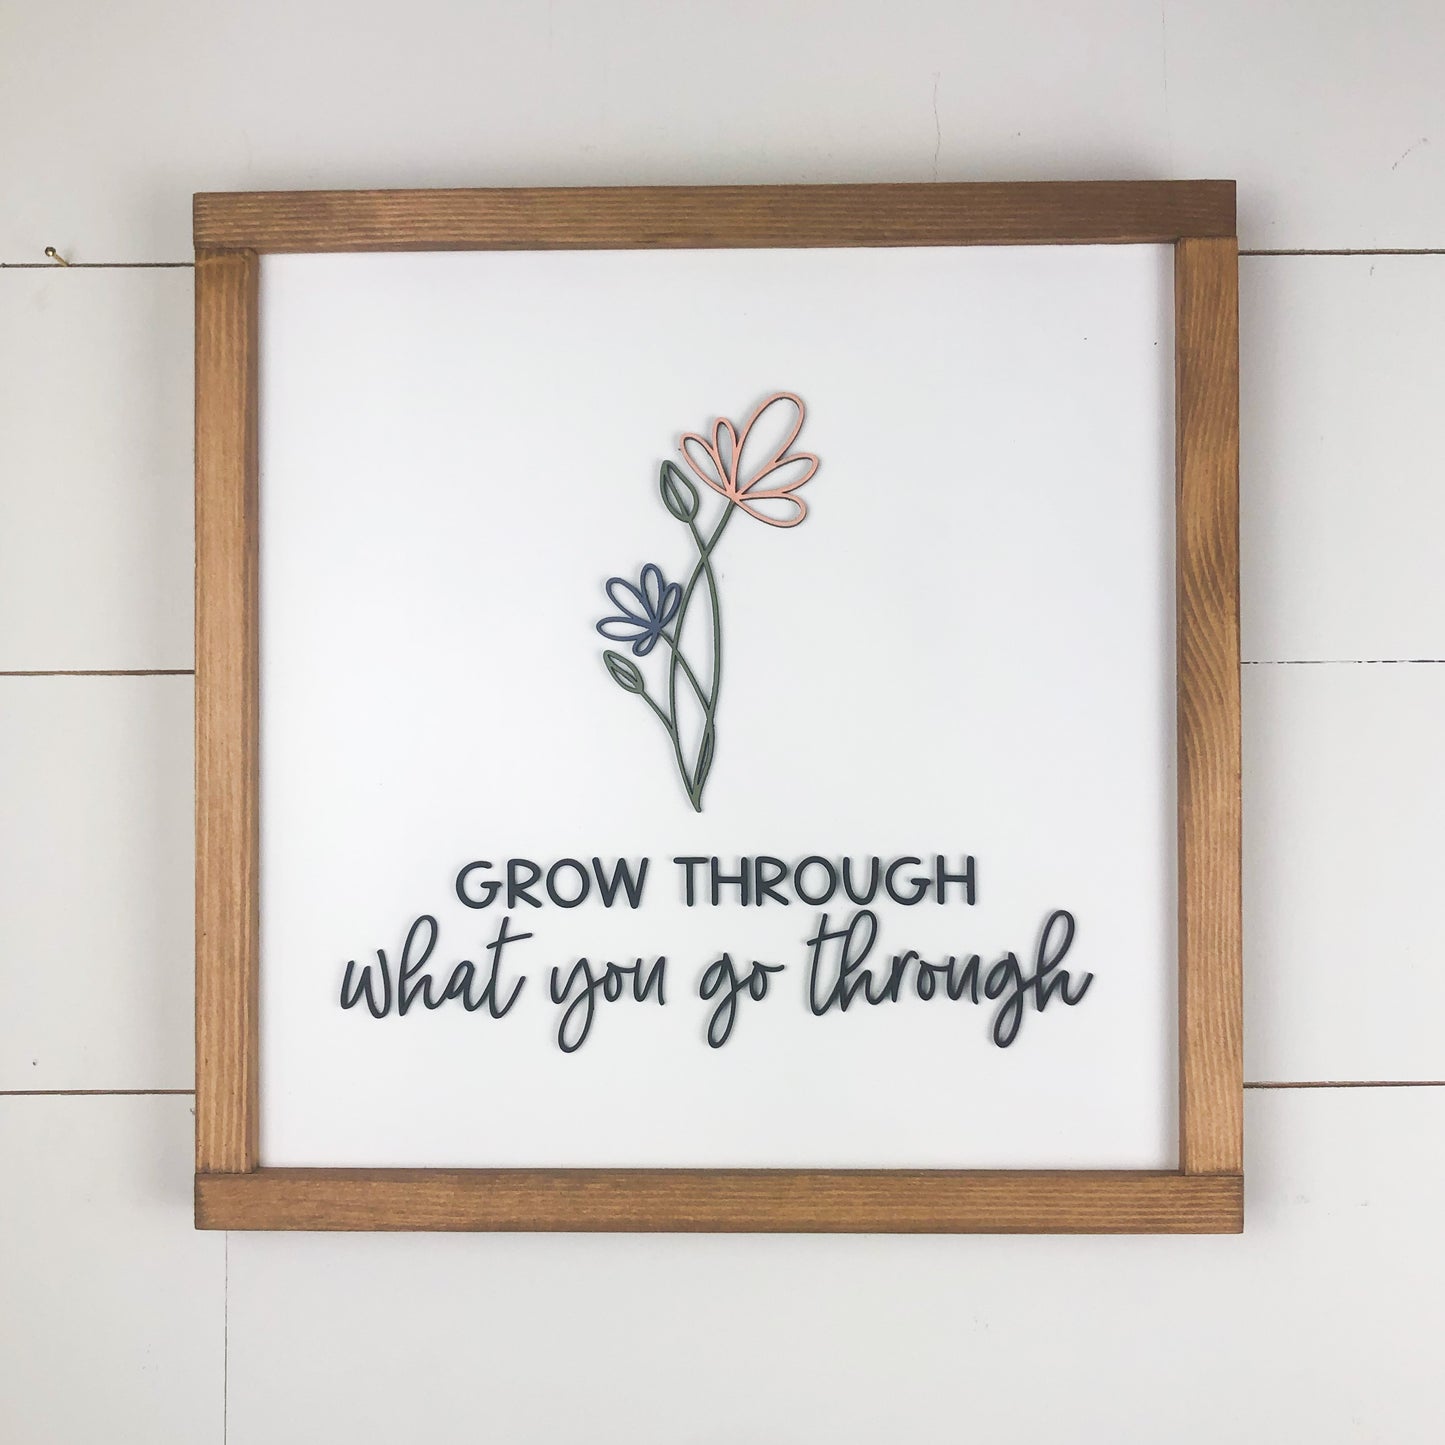 Grow Through What You Go Through | 14x14 in Wood Sign